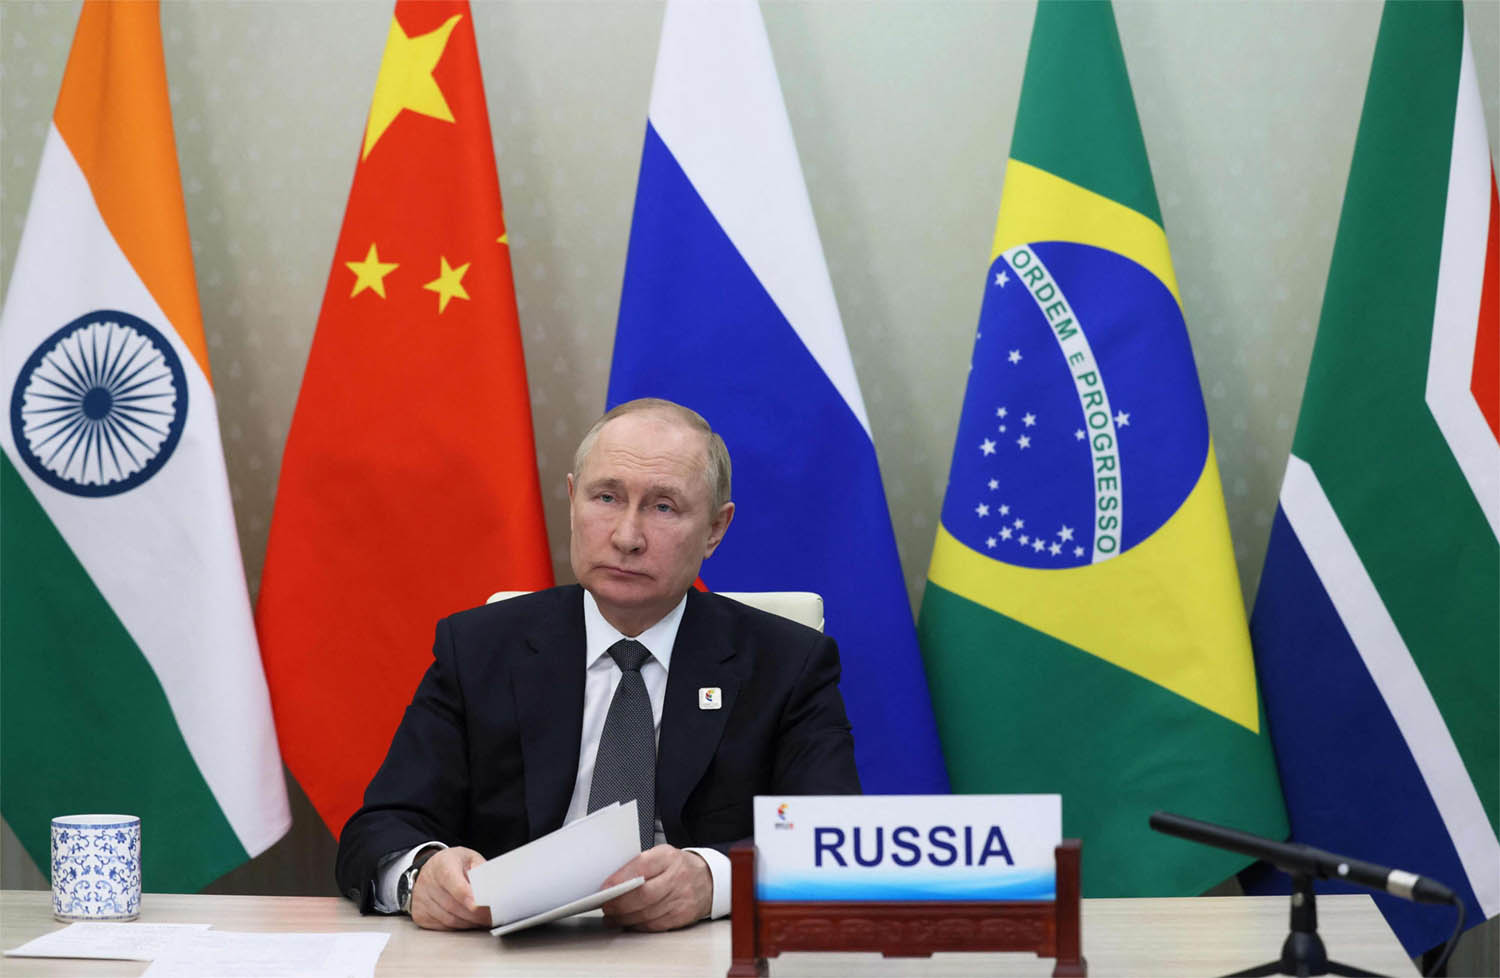 The BRICS group includes Brazil, Russia, India, China and South Africa 